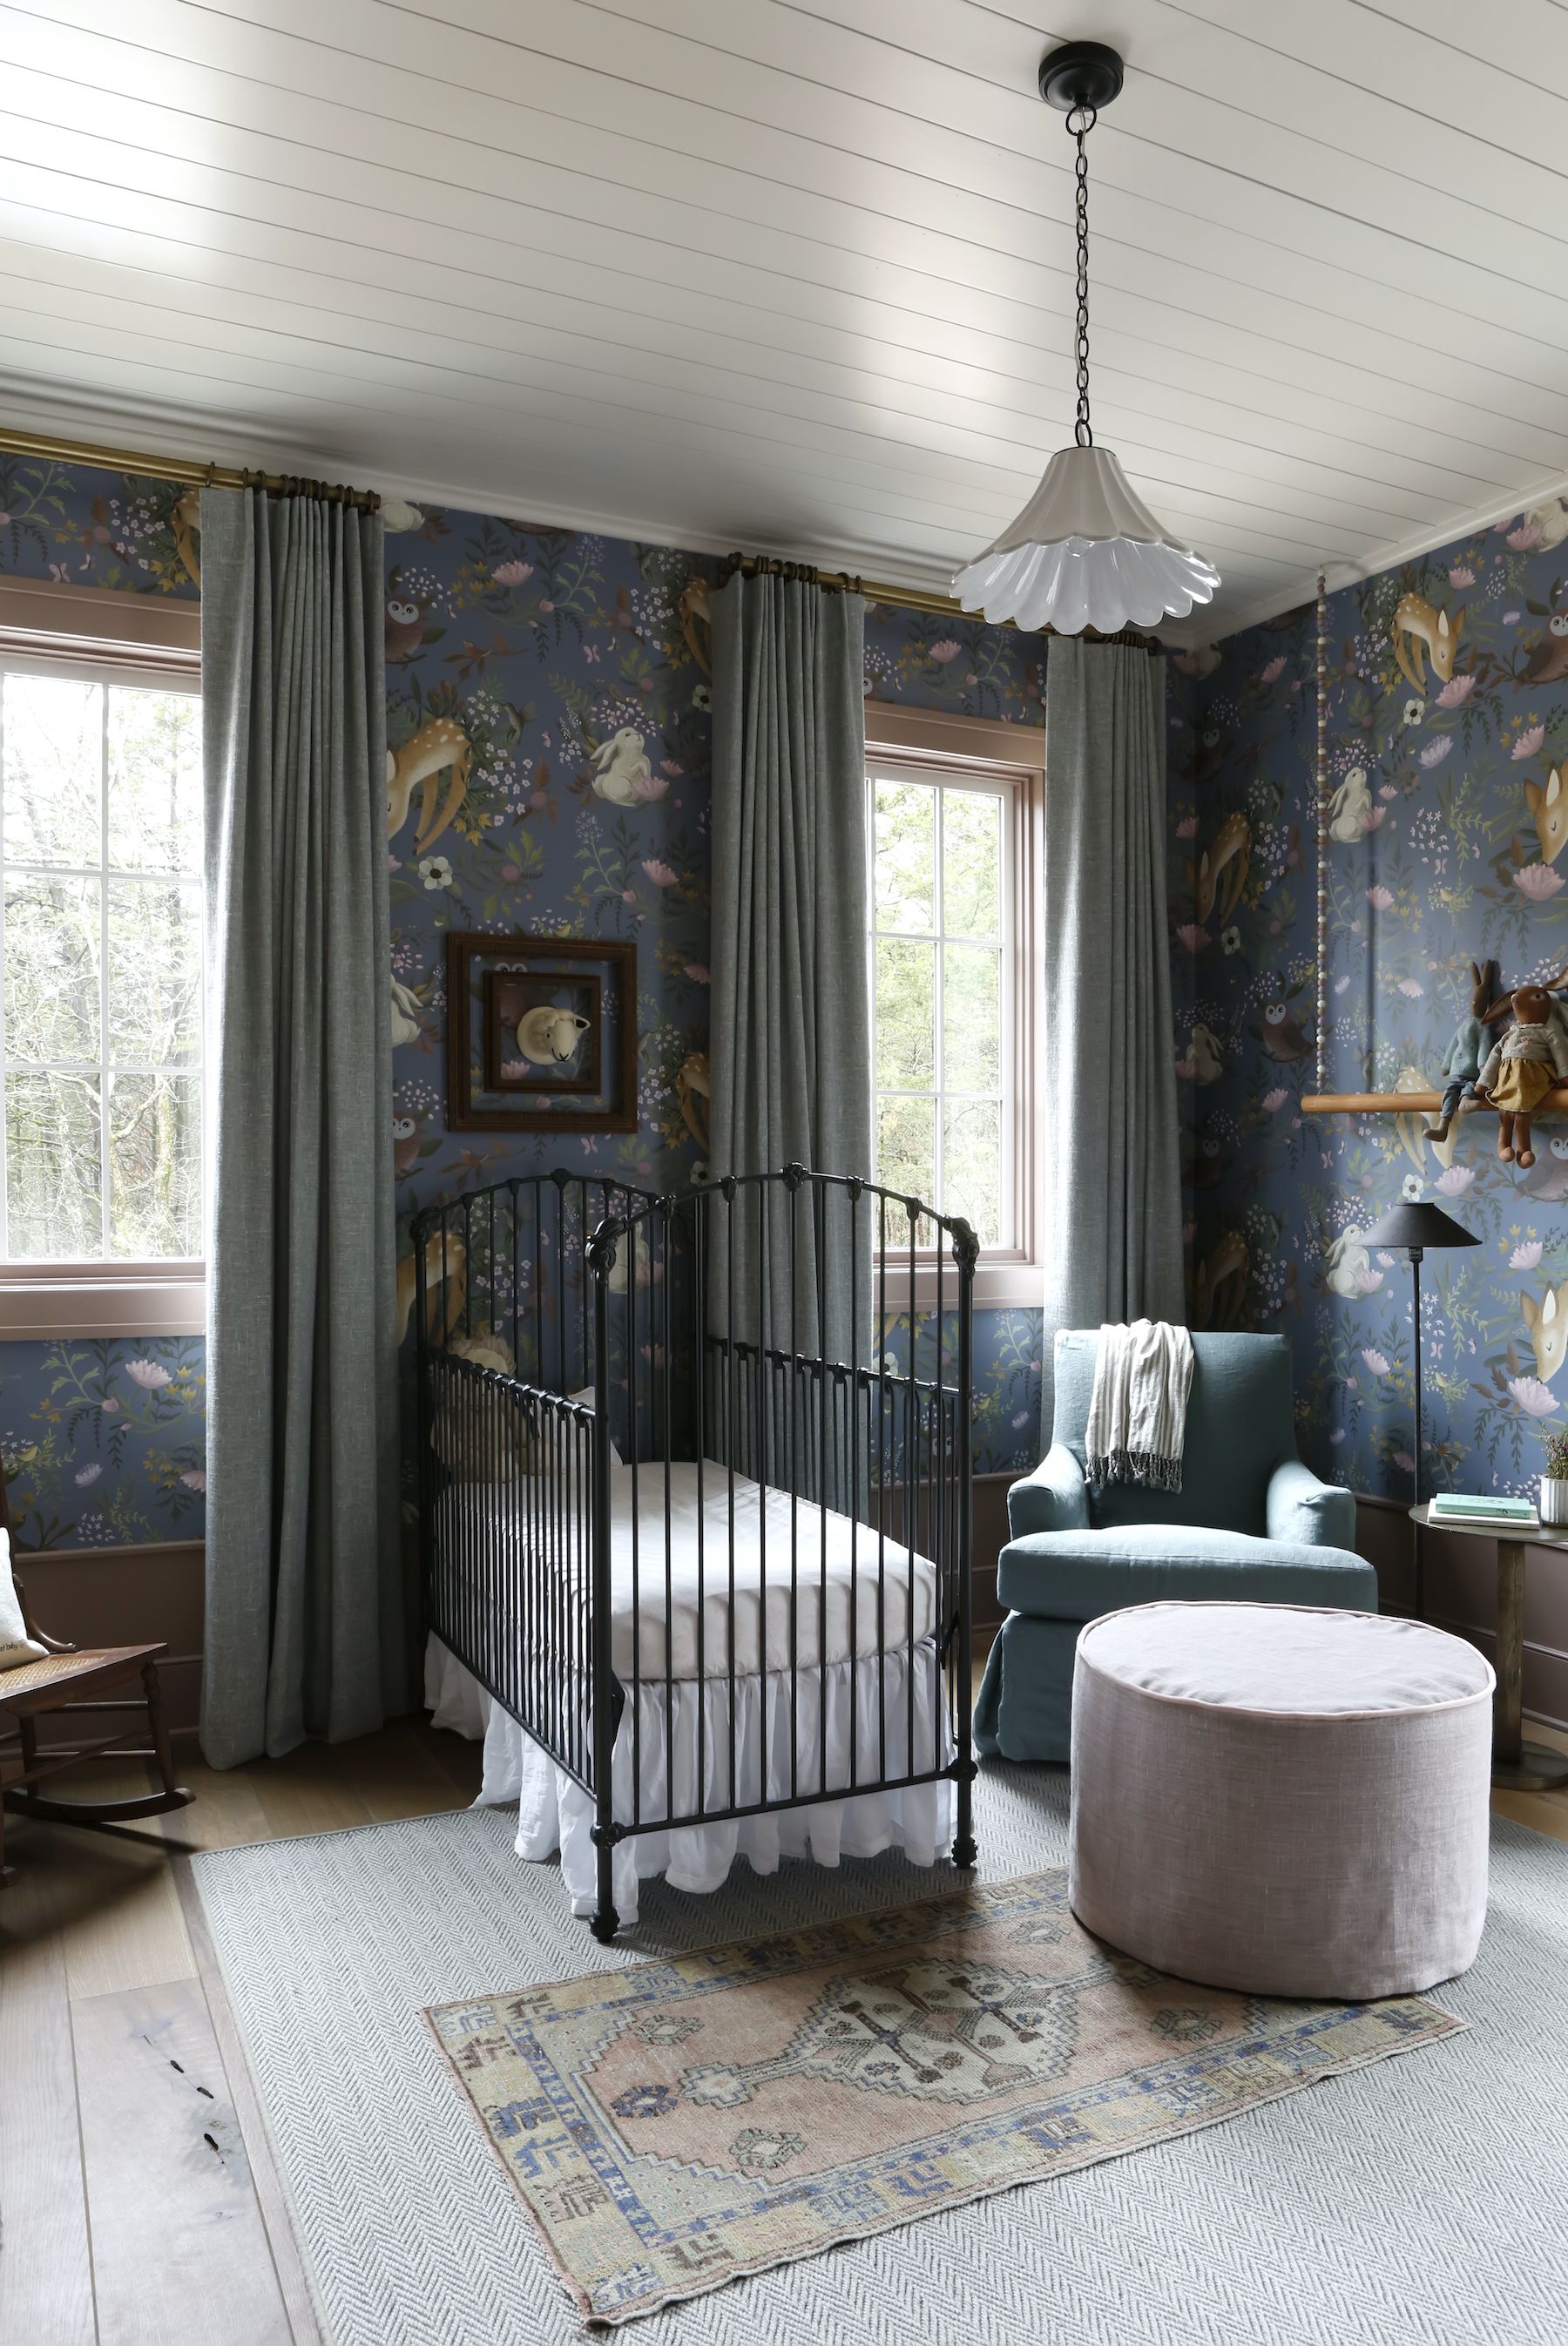 21 nursery ideas to welcome your bundle of joy in style | Ideal Home